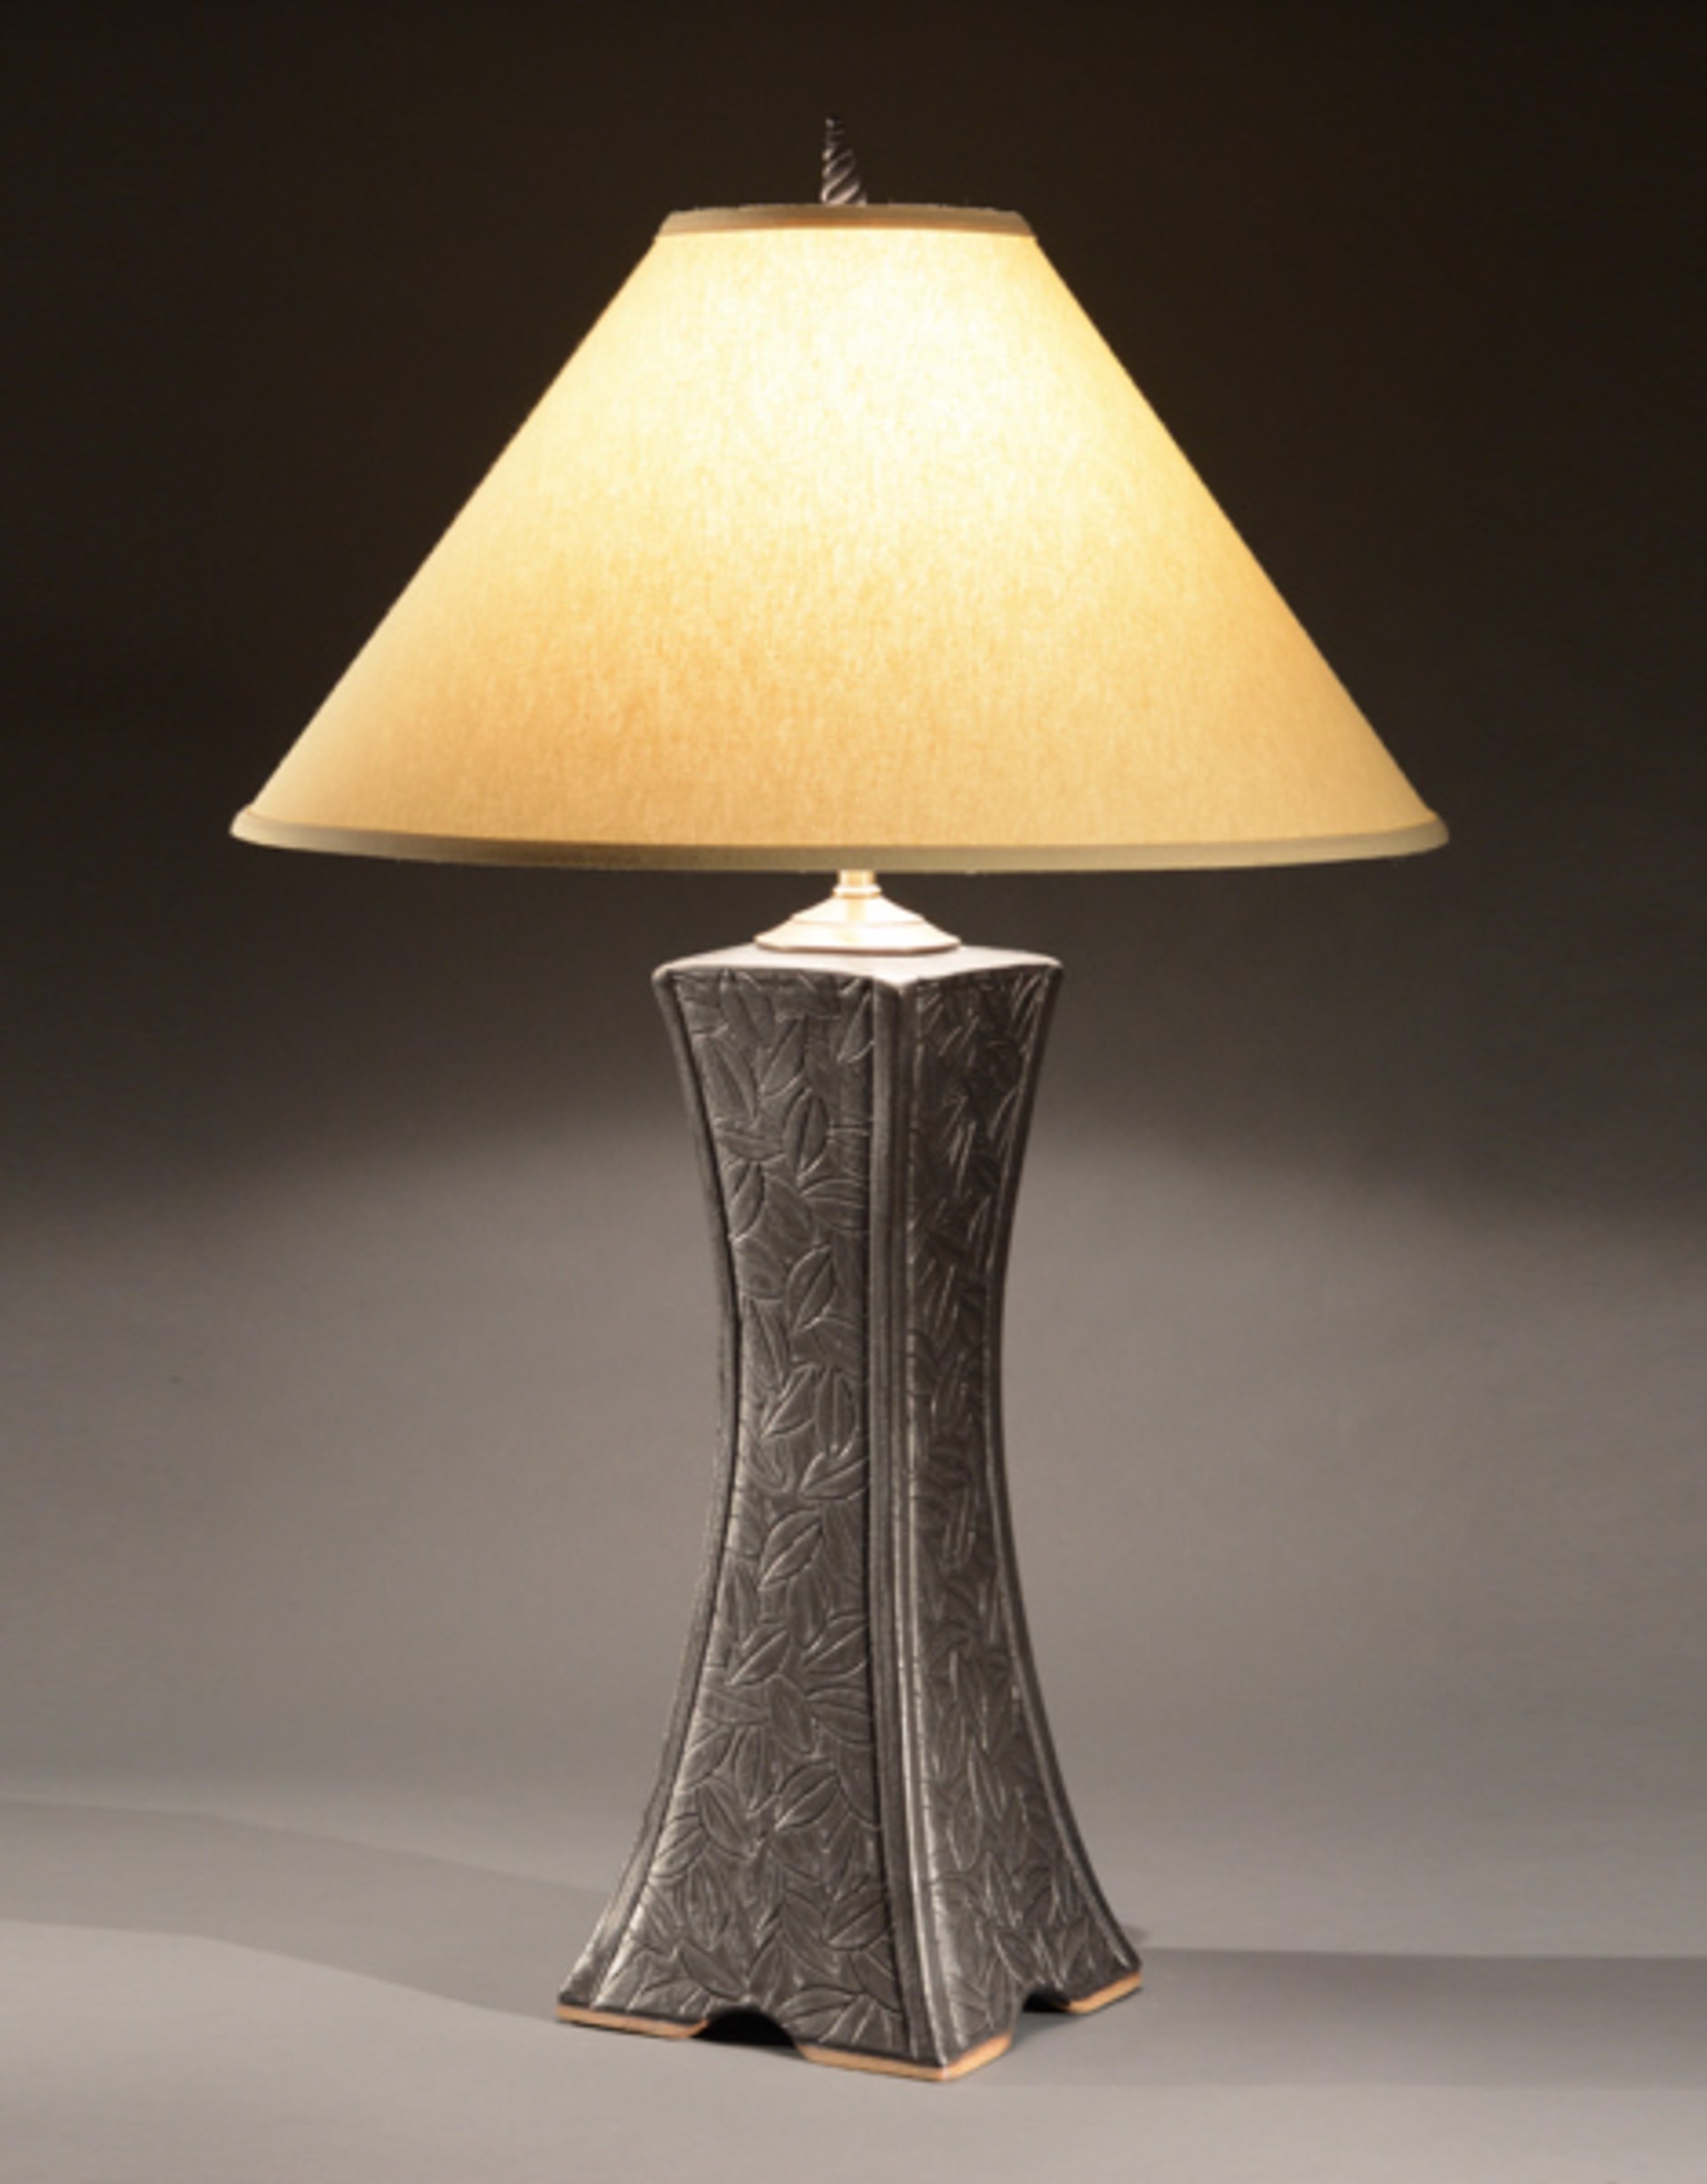 Grove Arcade Lamp by Jim & Shirl Parmentier